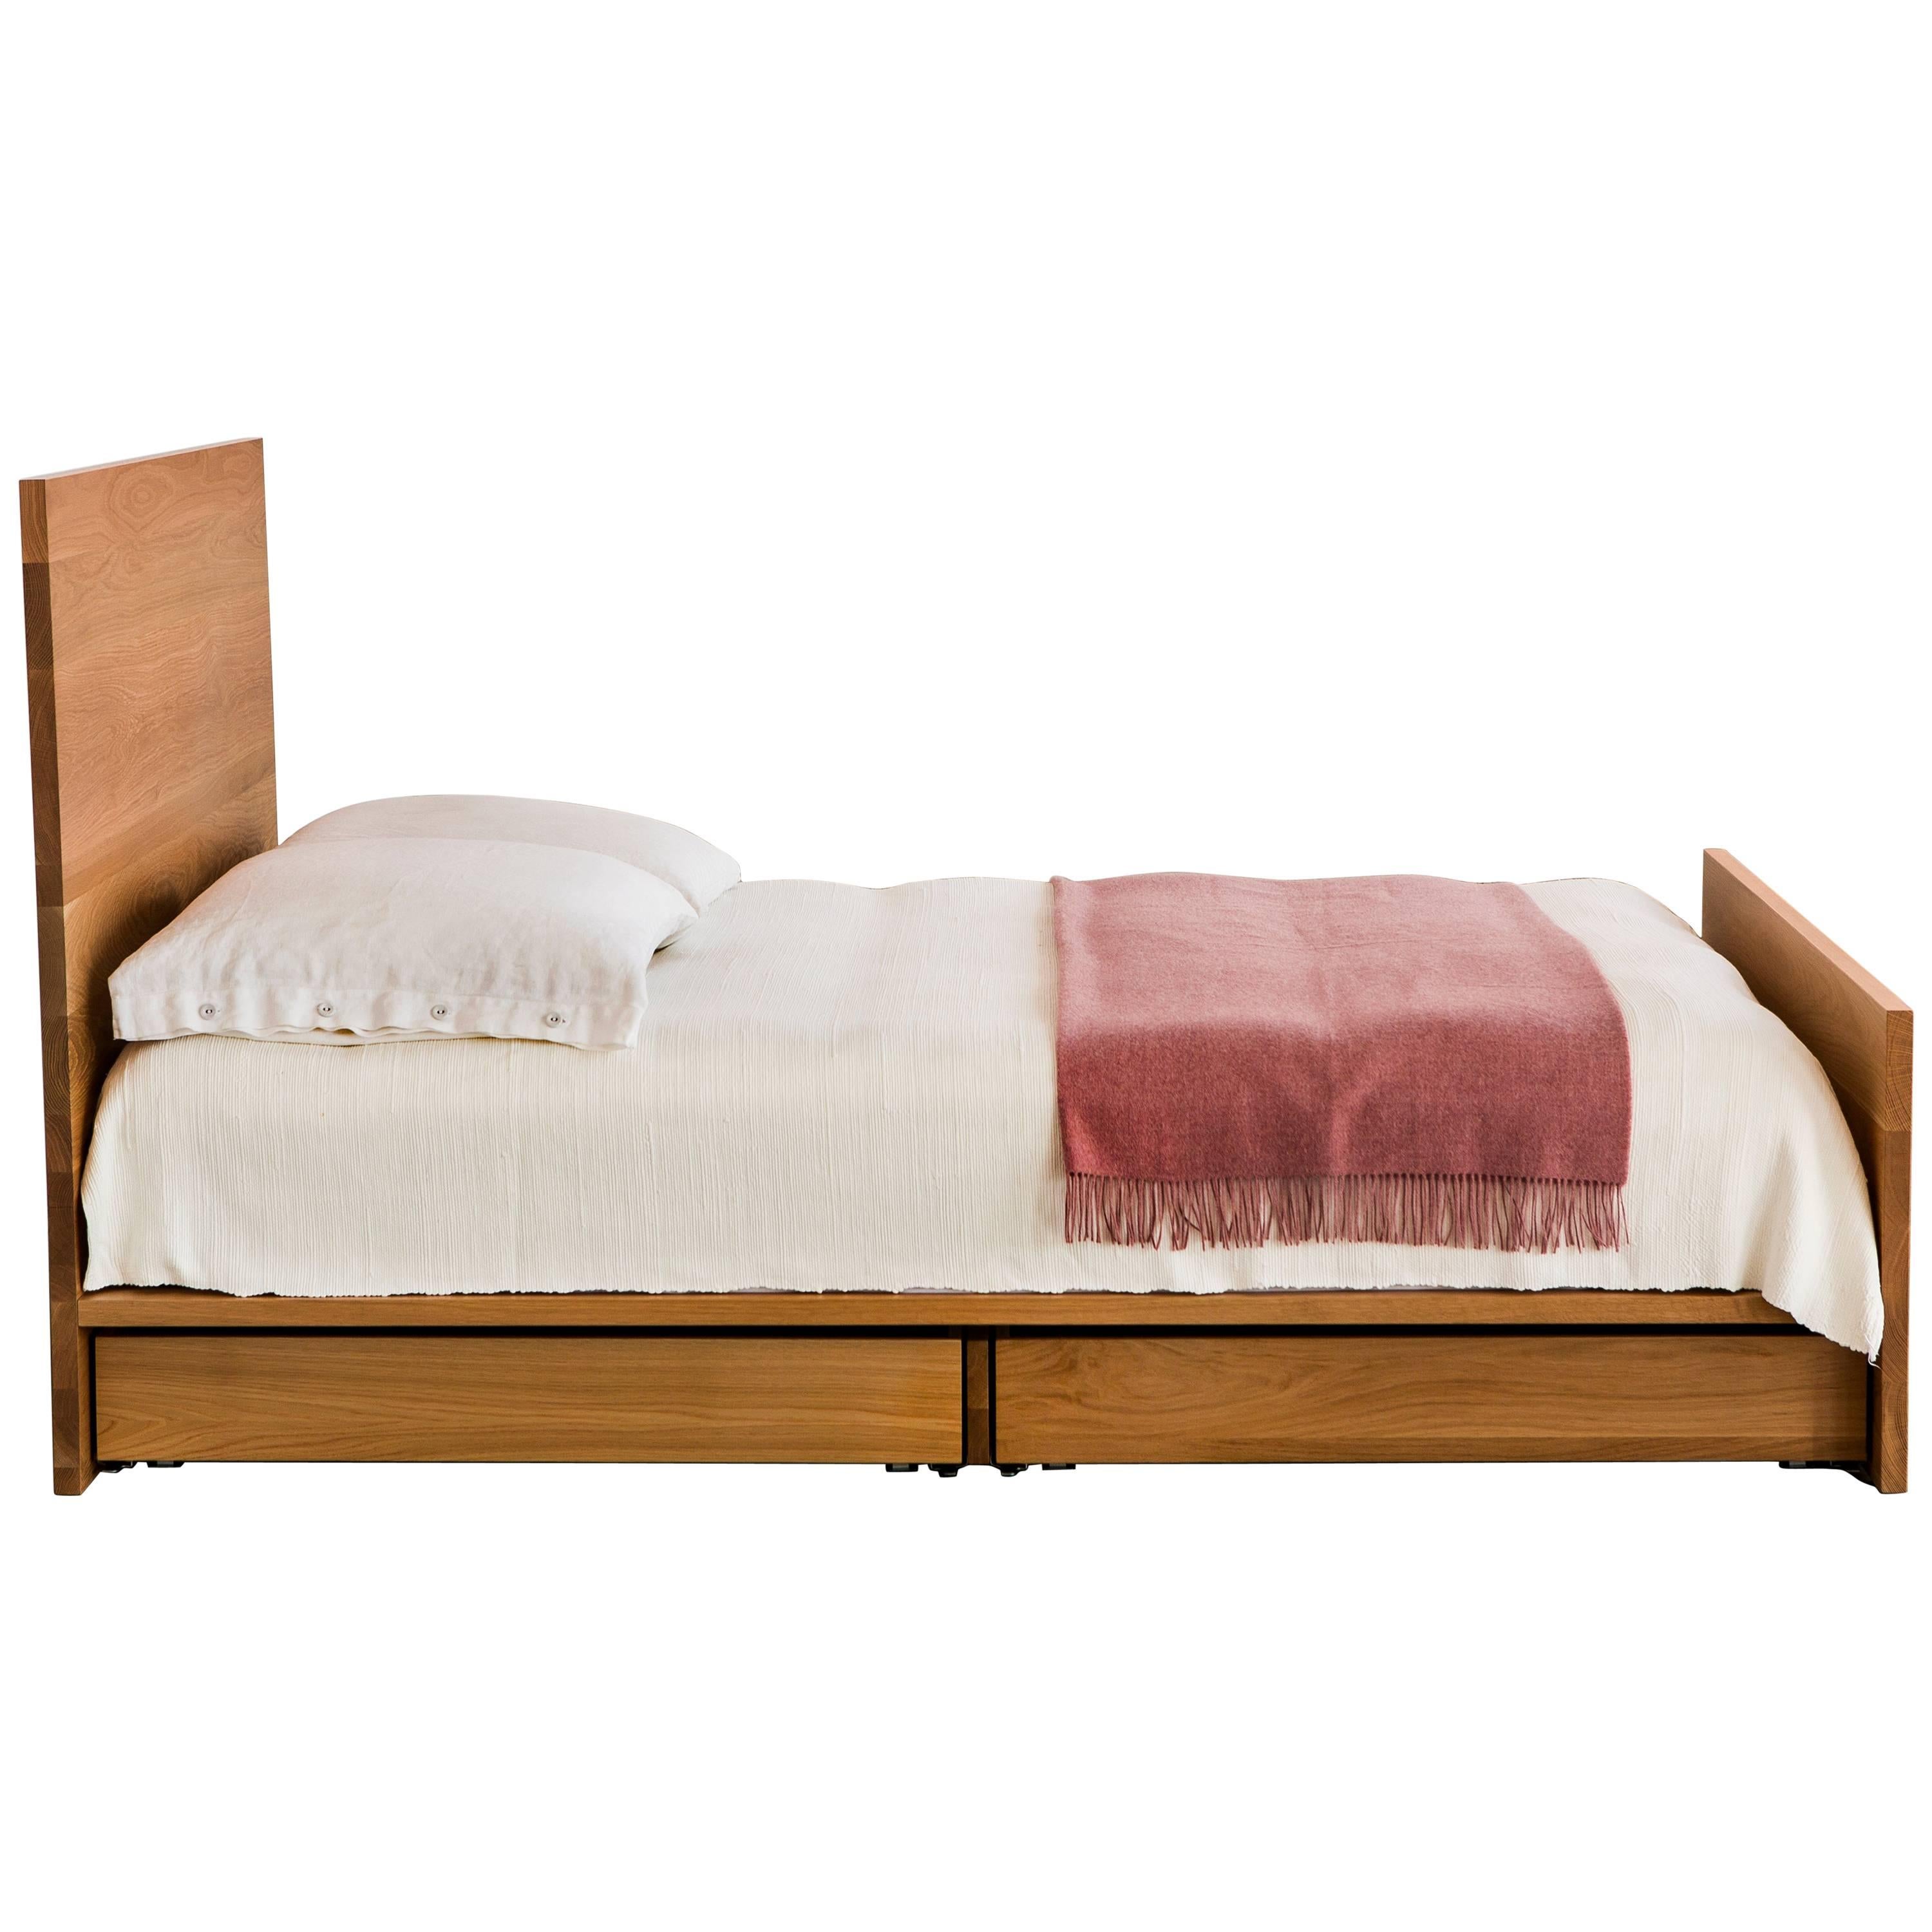 The AB6 bed, an understated platform bed, features discrete storage below (optional) an elegant expanse of solid hardwood. 

Shown in solid white oak with bronze accents. 

Dimensions: 60” W x 46” H x 83” L, platform 9.5” H

All of our solid